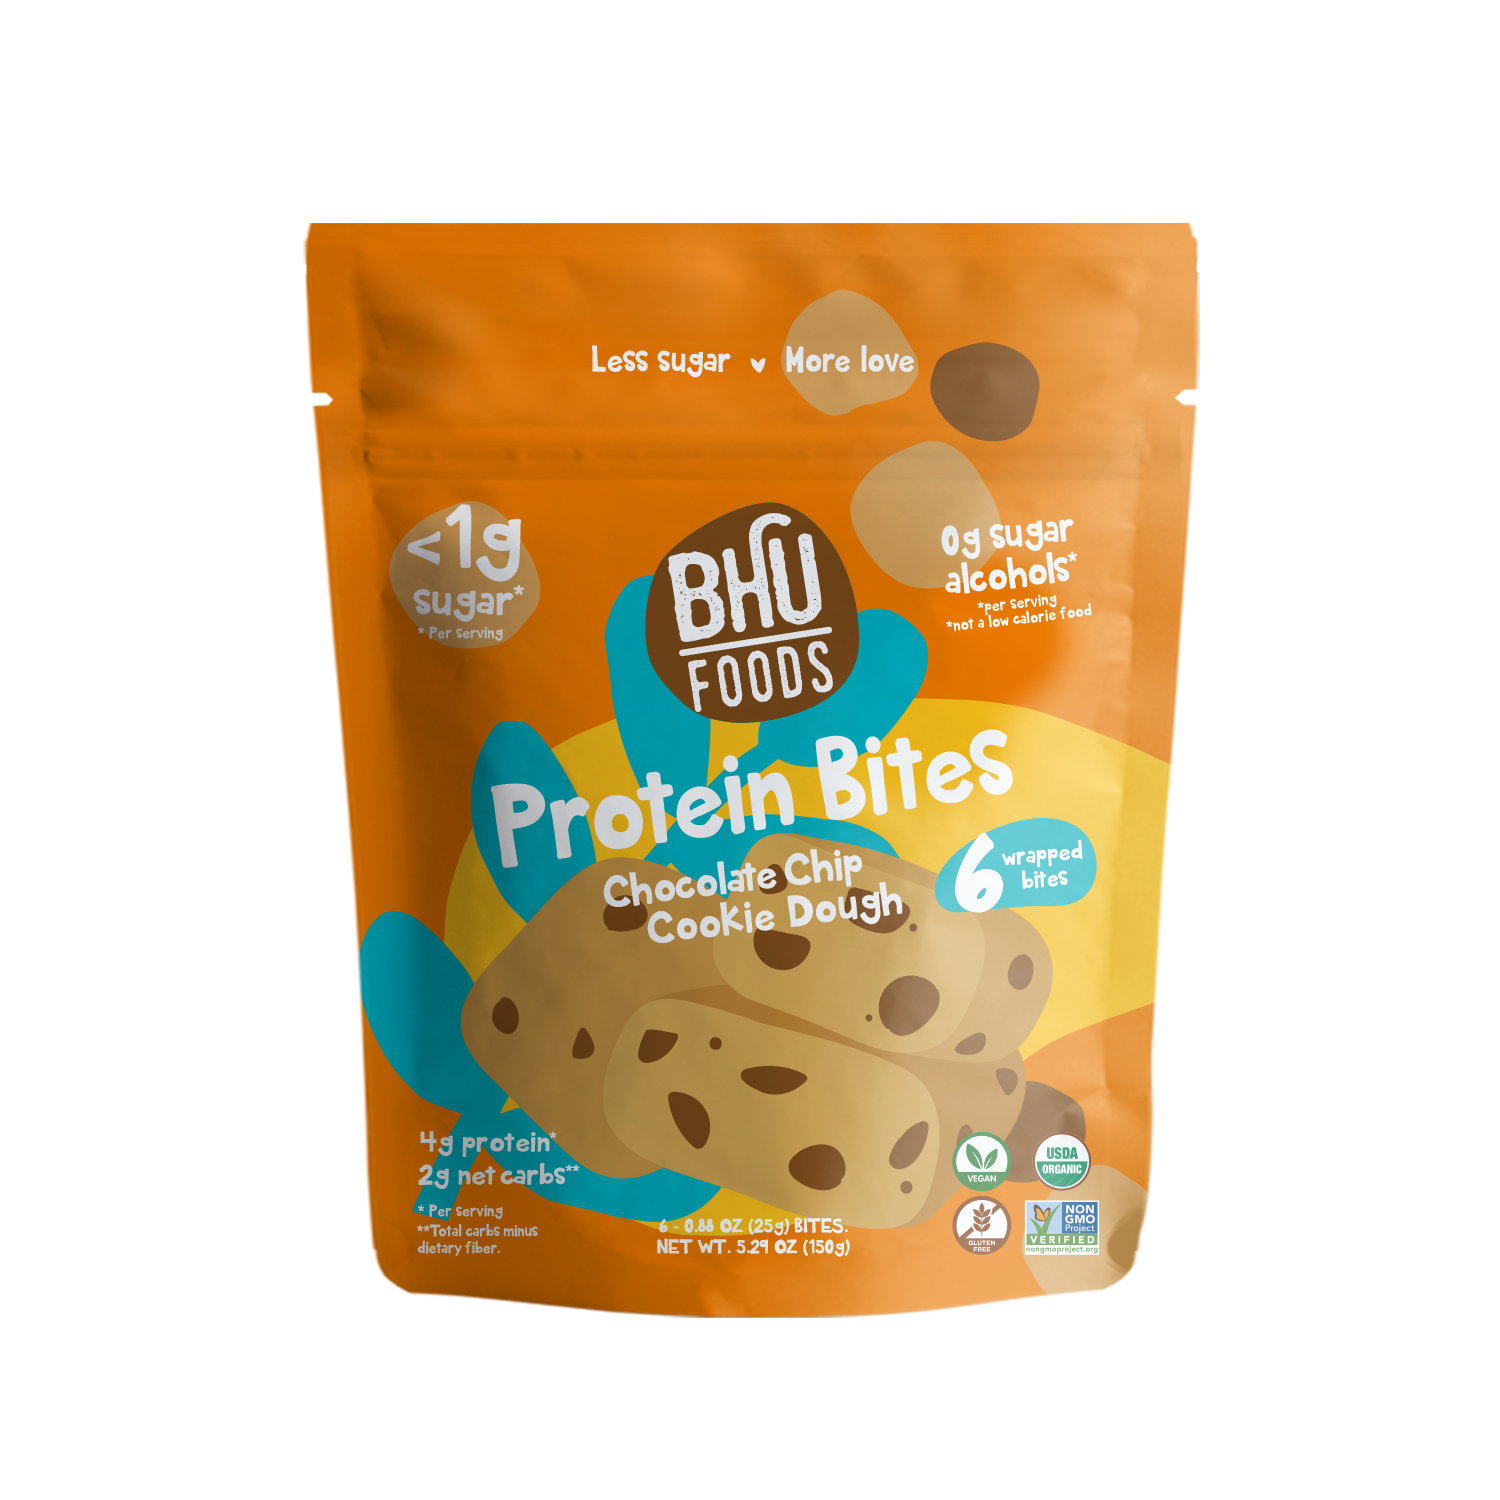 BHU Foods Protein Bites - Chocolate Chip Cookie Dough 6 innerpacks per case 5.3 oz